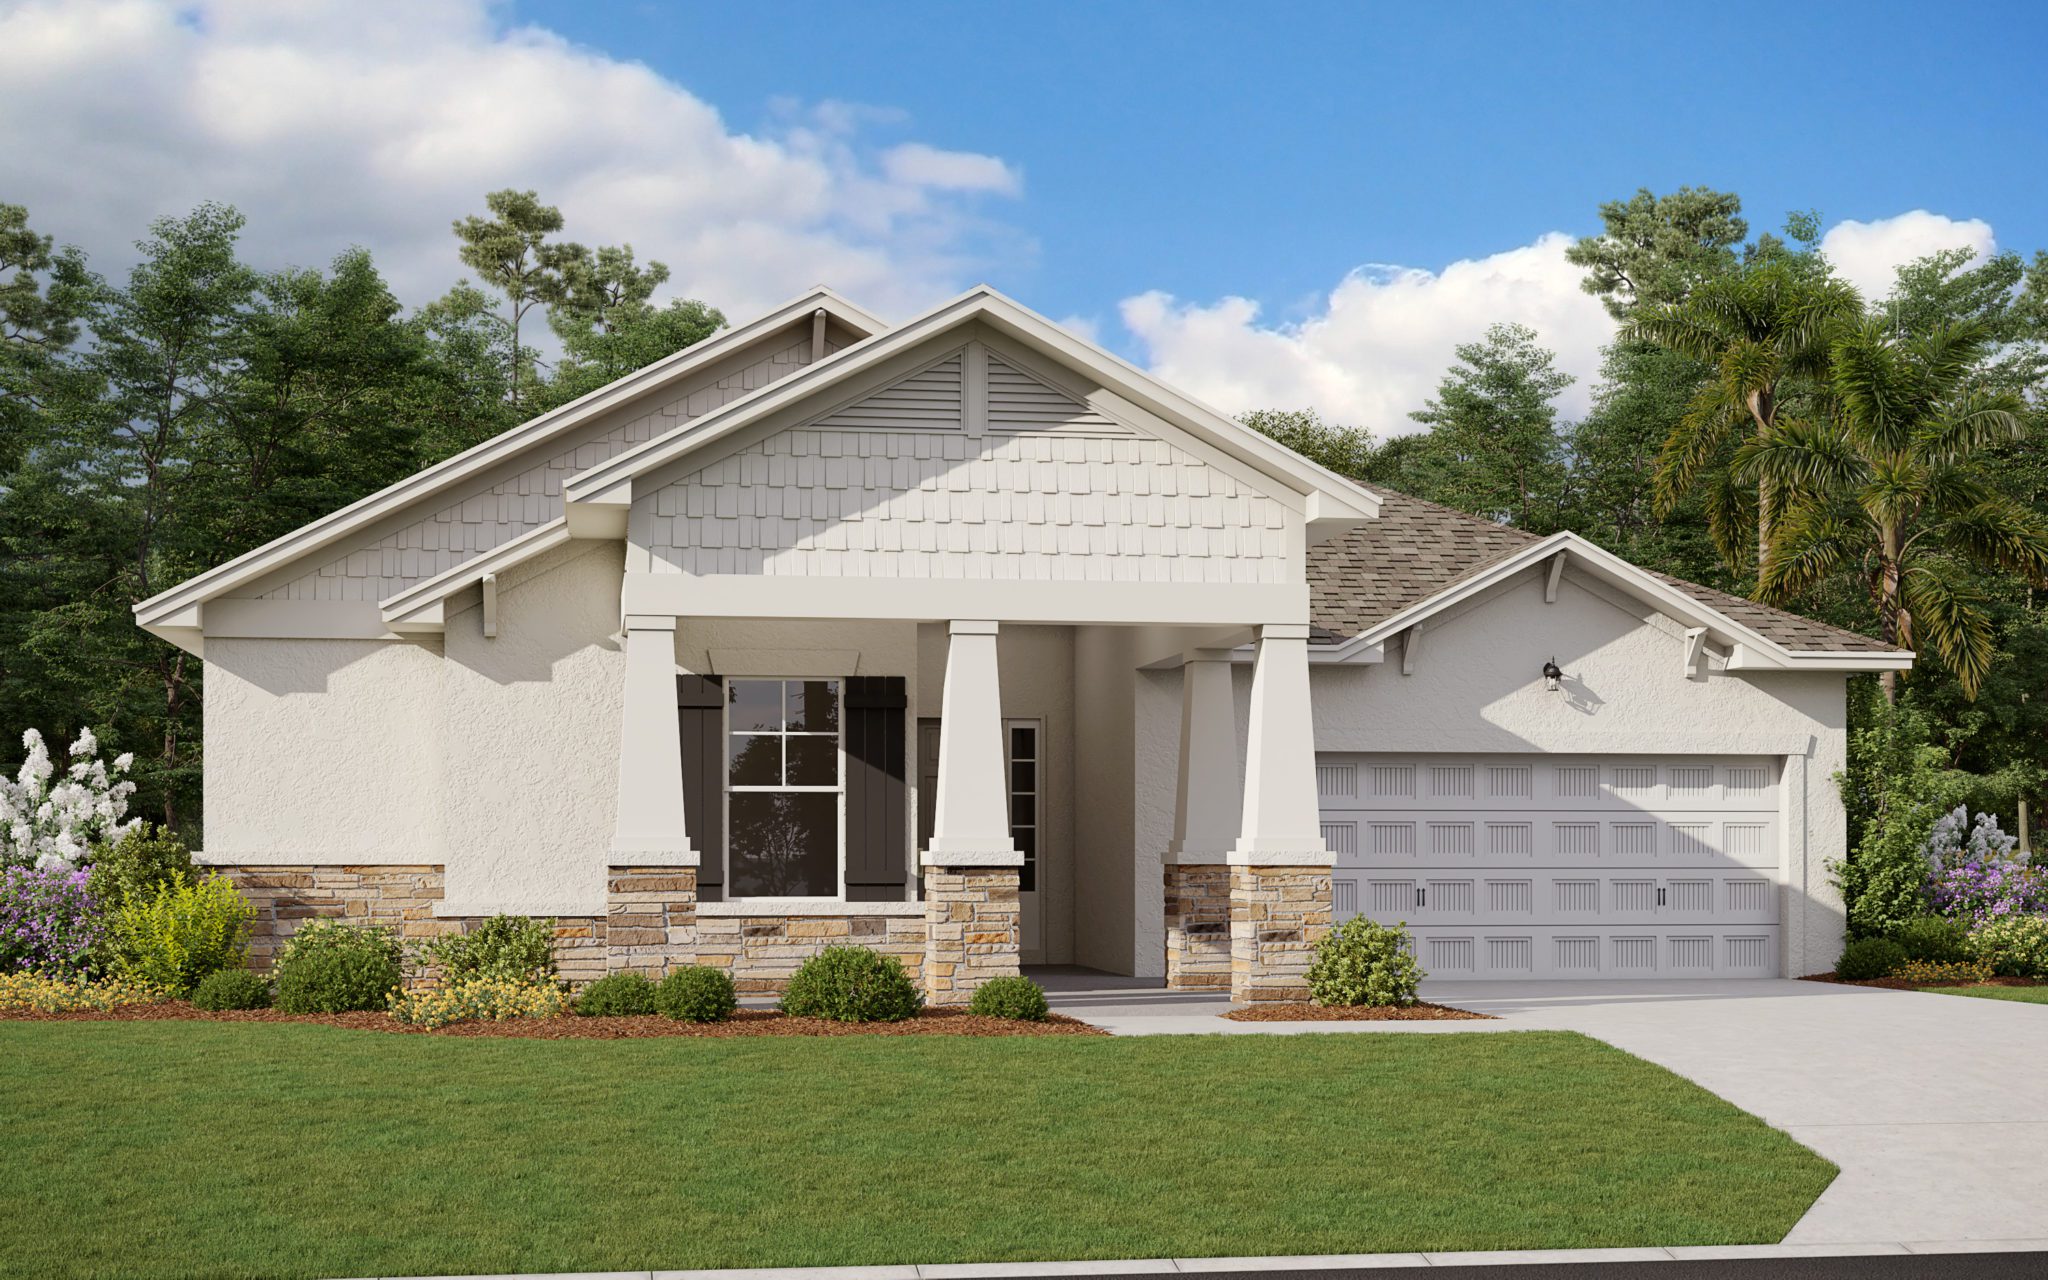 Dream Finders Homes Now Selling At Summerdale Park In Lake Nona Lake Nona